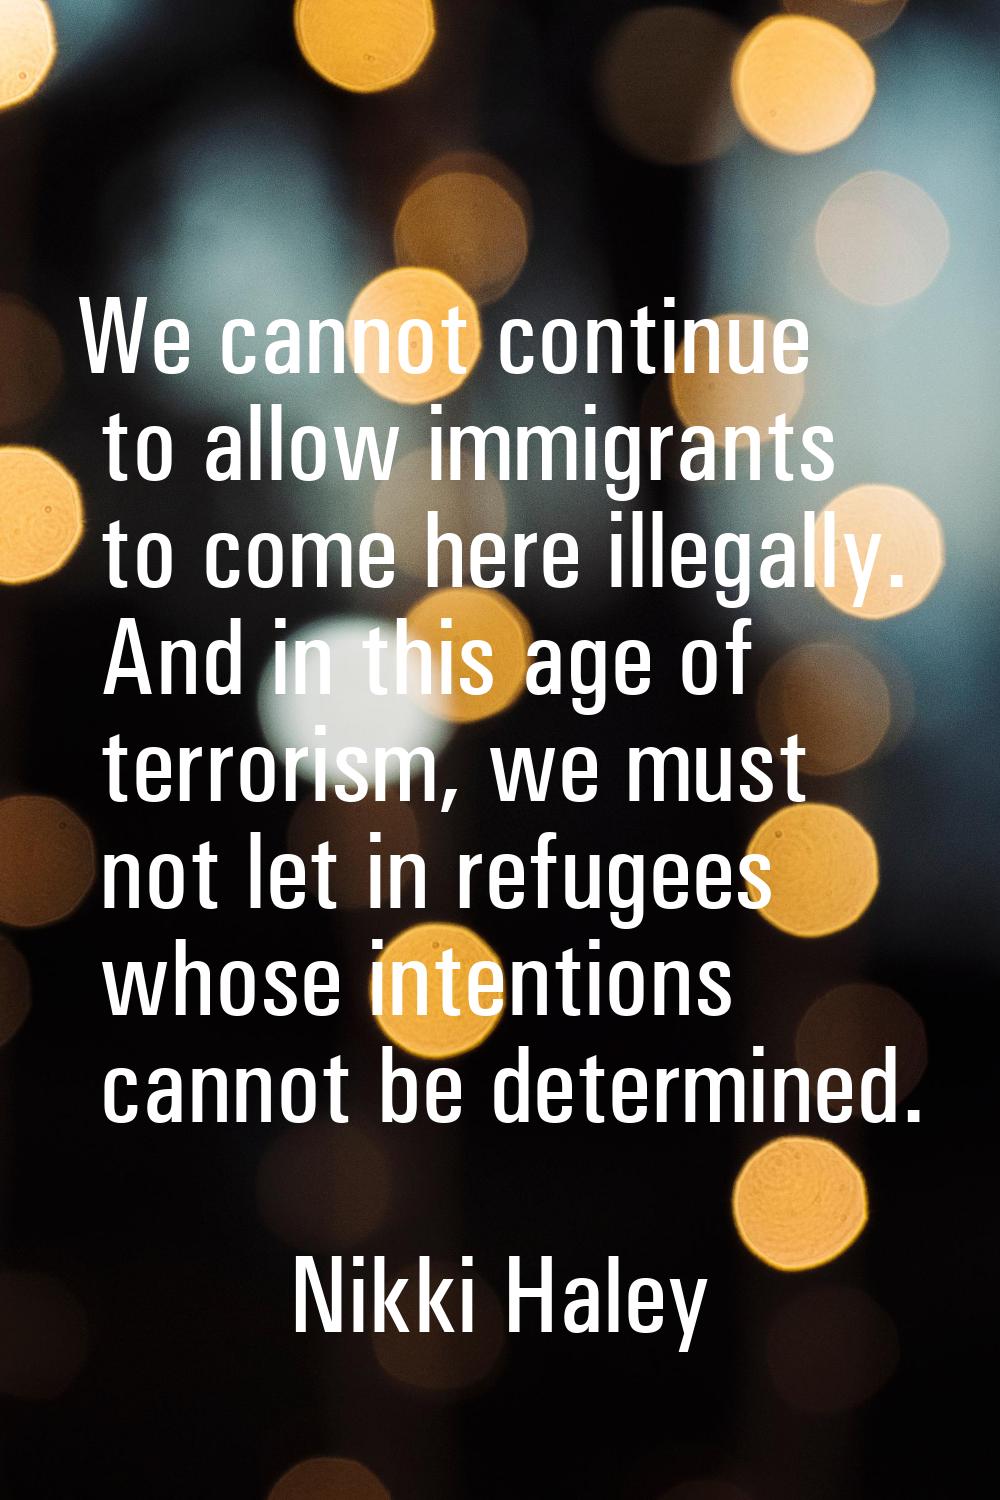 We cannot continue to allow immigrants to come here illegally. And in this age of terrorism, we mus